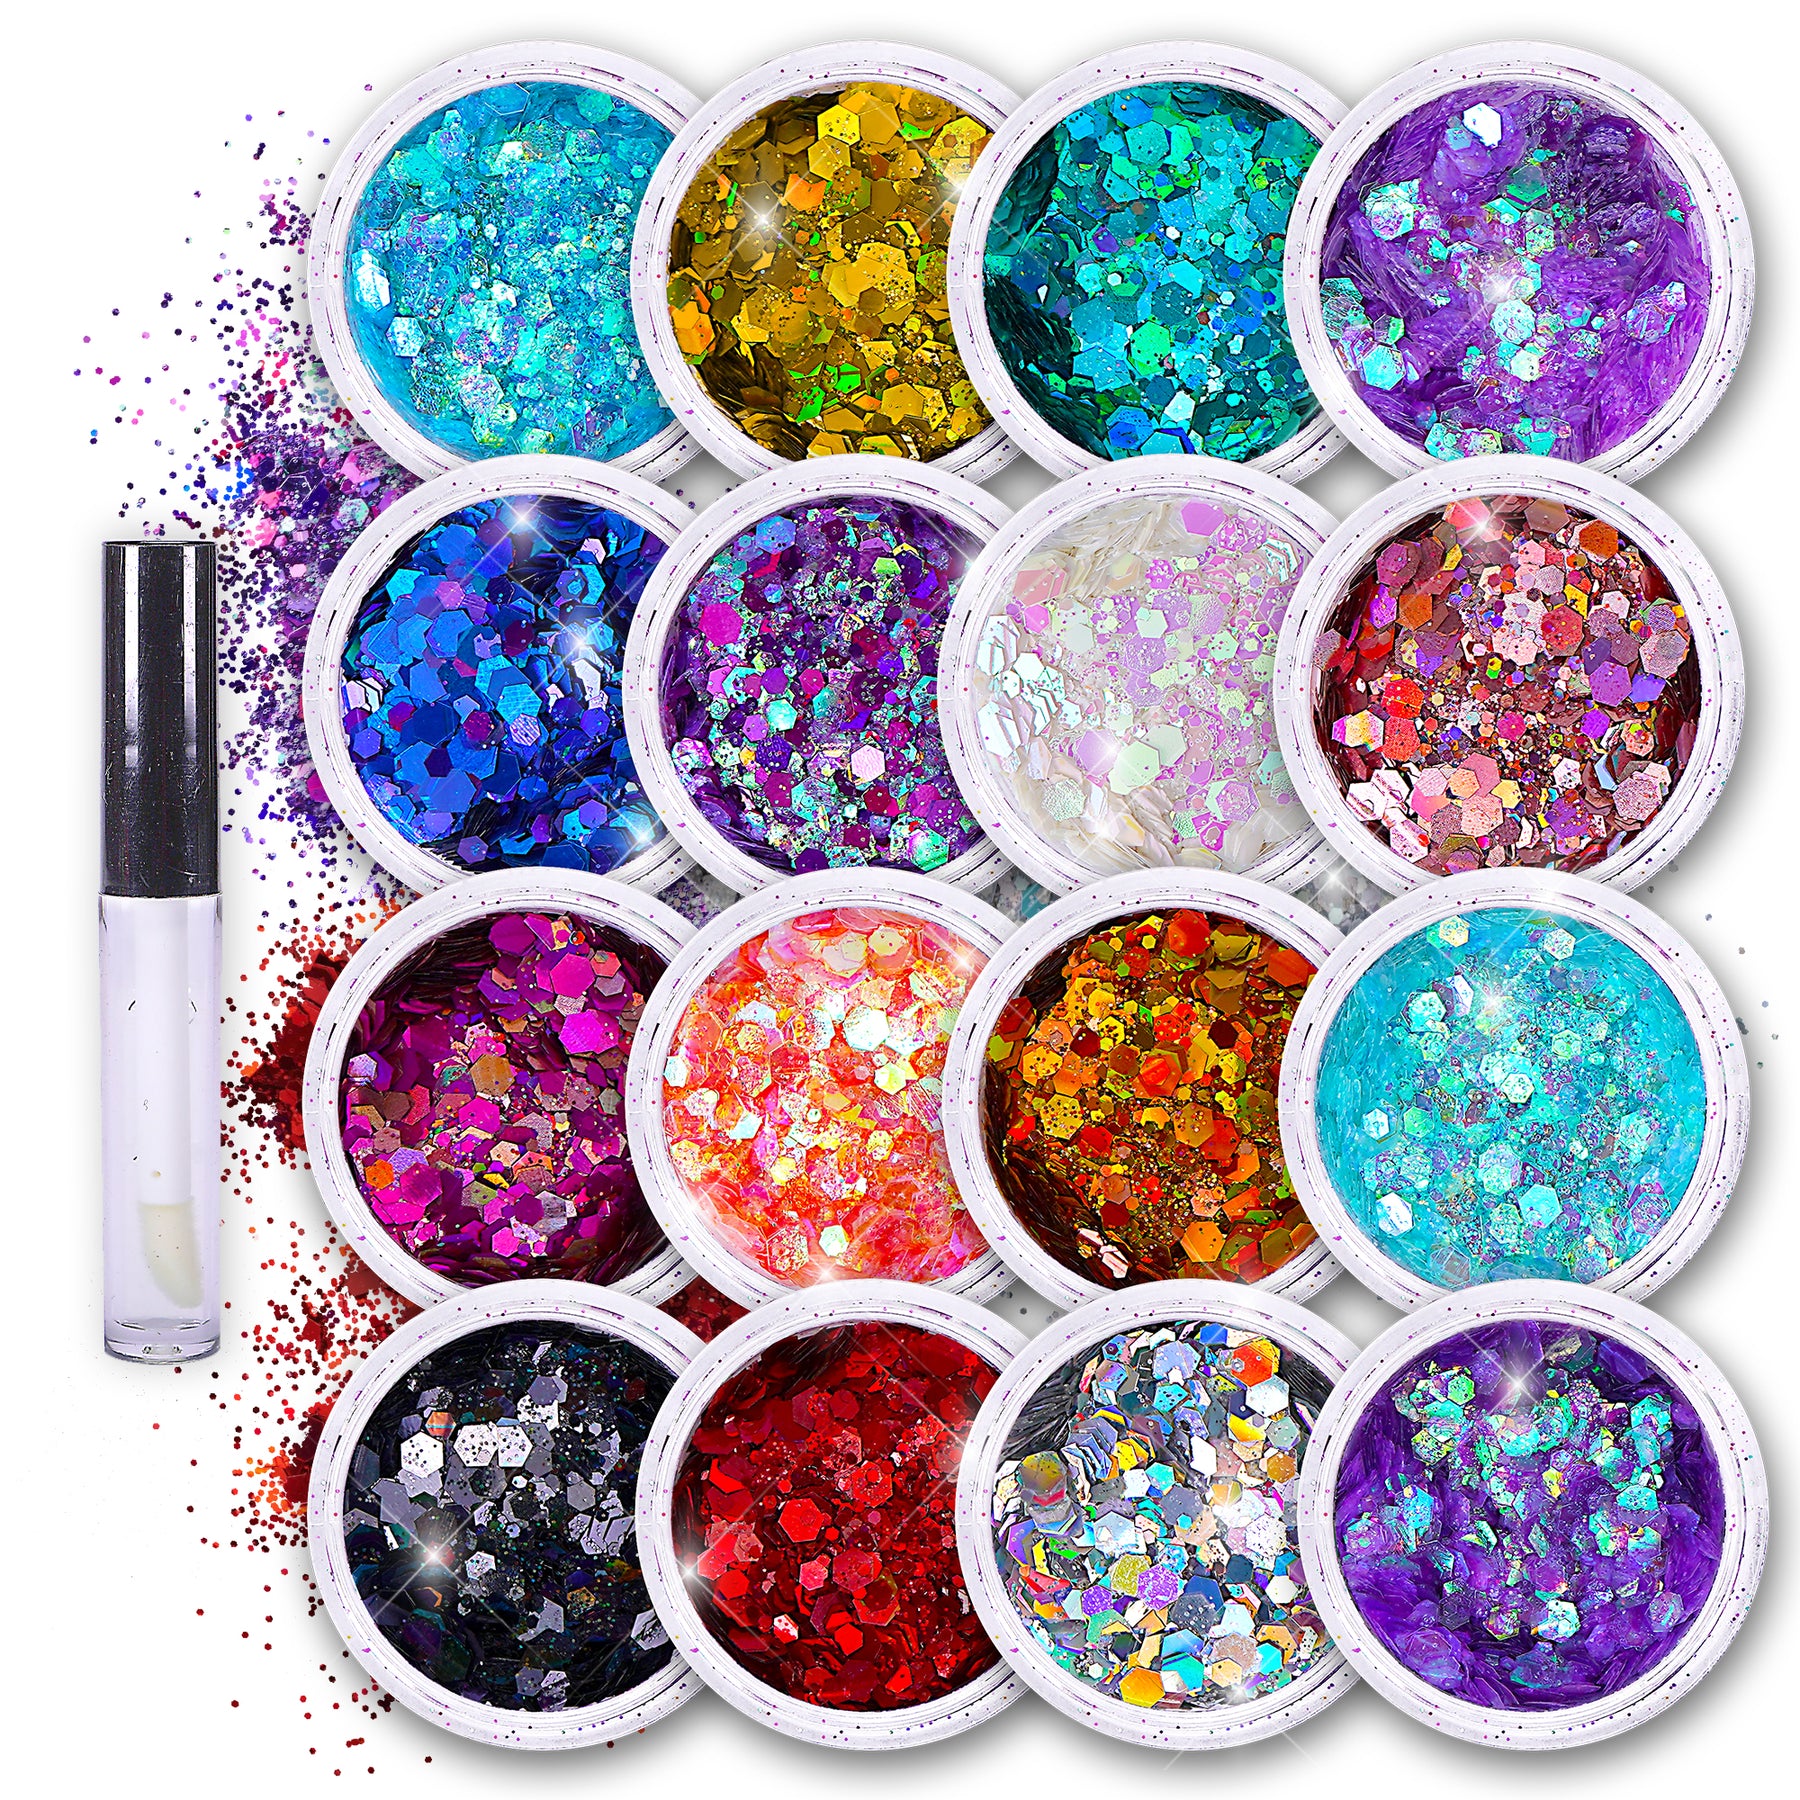 16 pack + 1 glitter glue Chunky Cosmetic Holographic Glitter